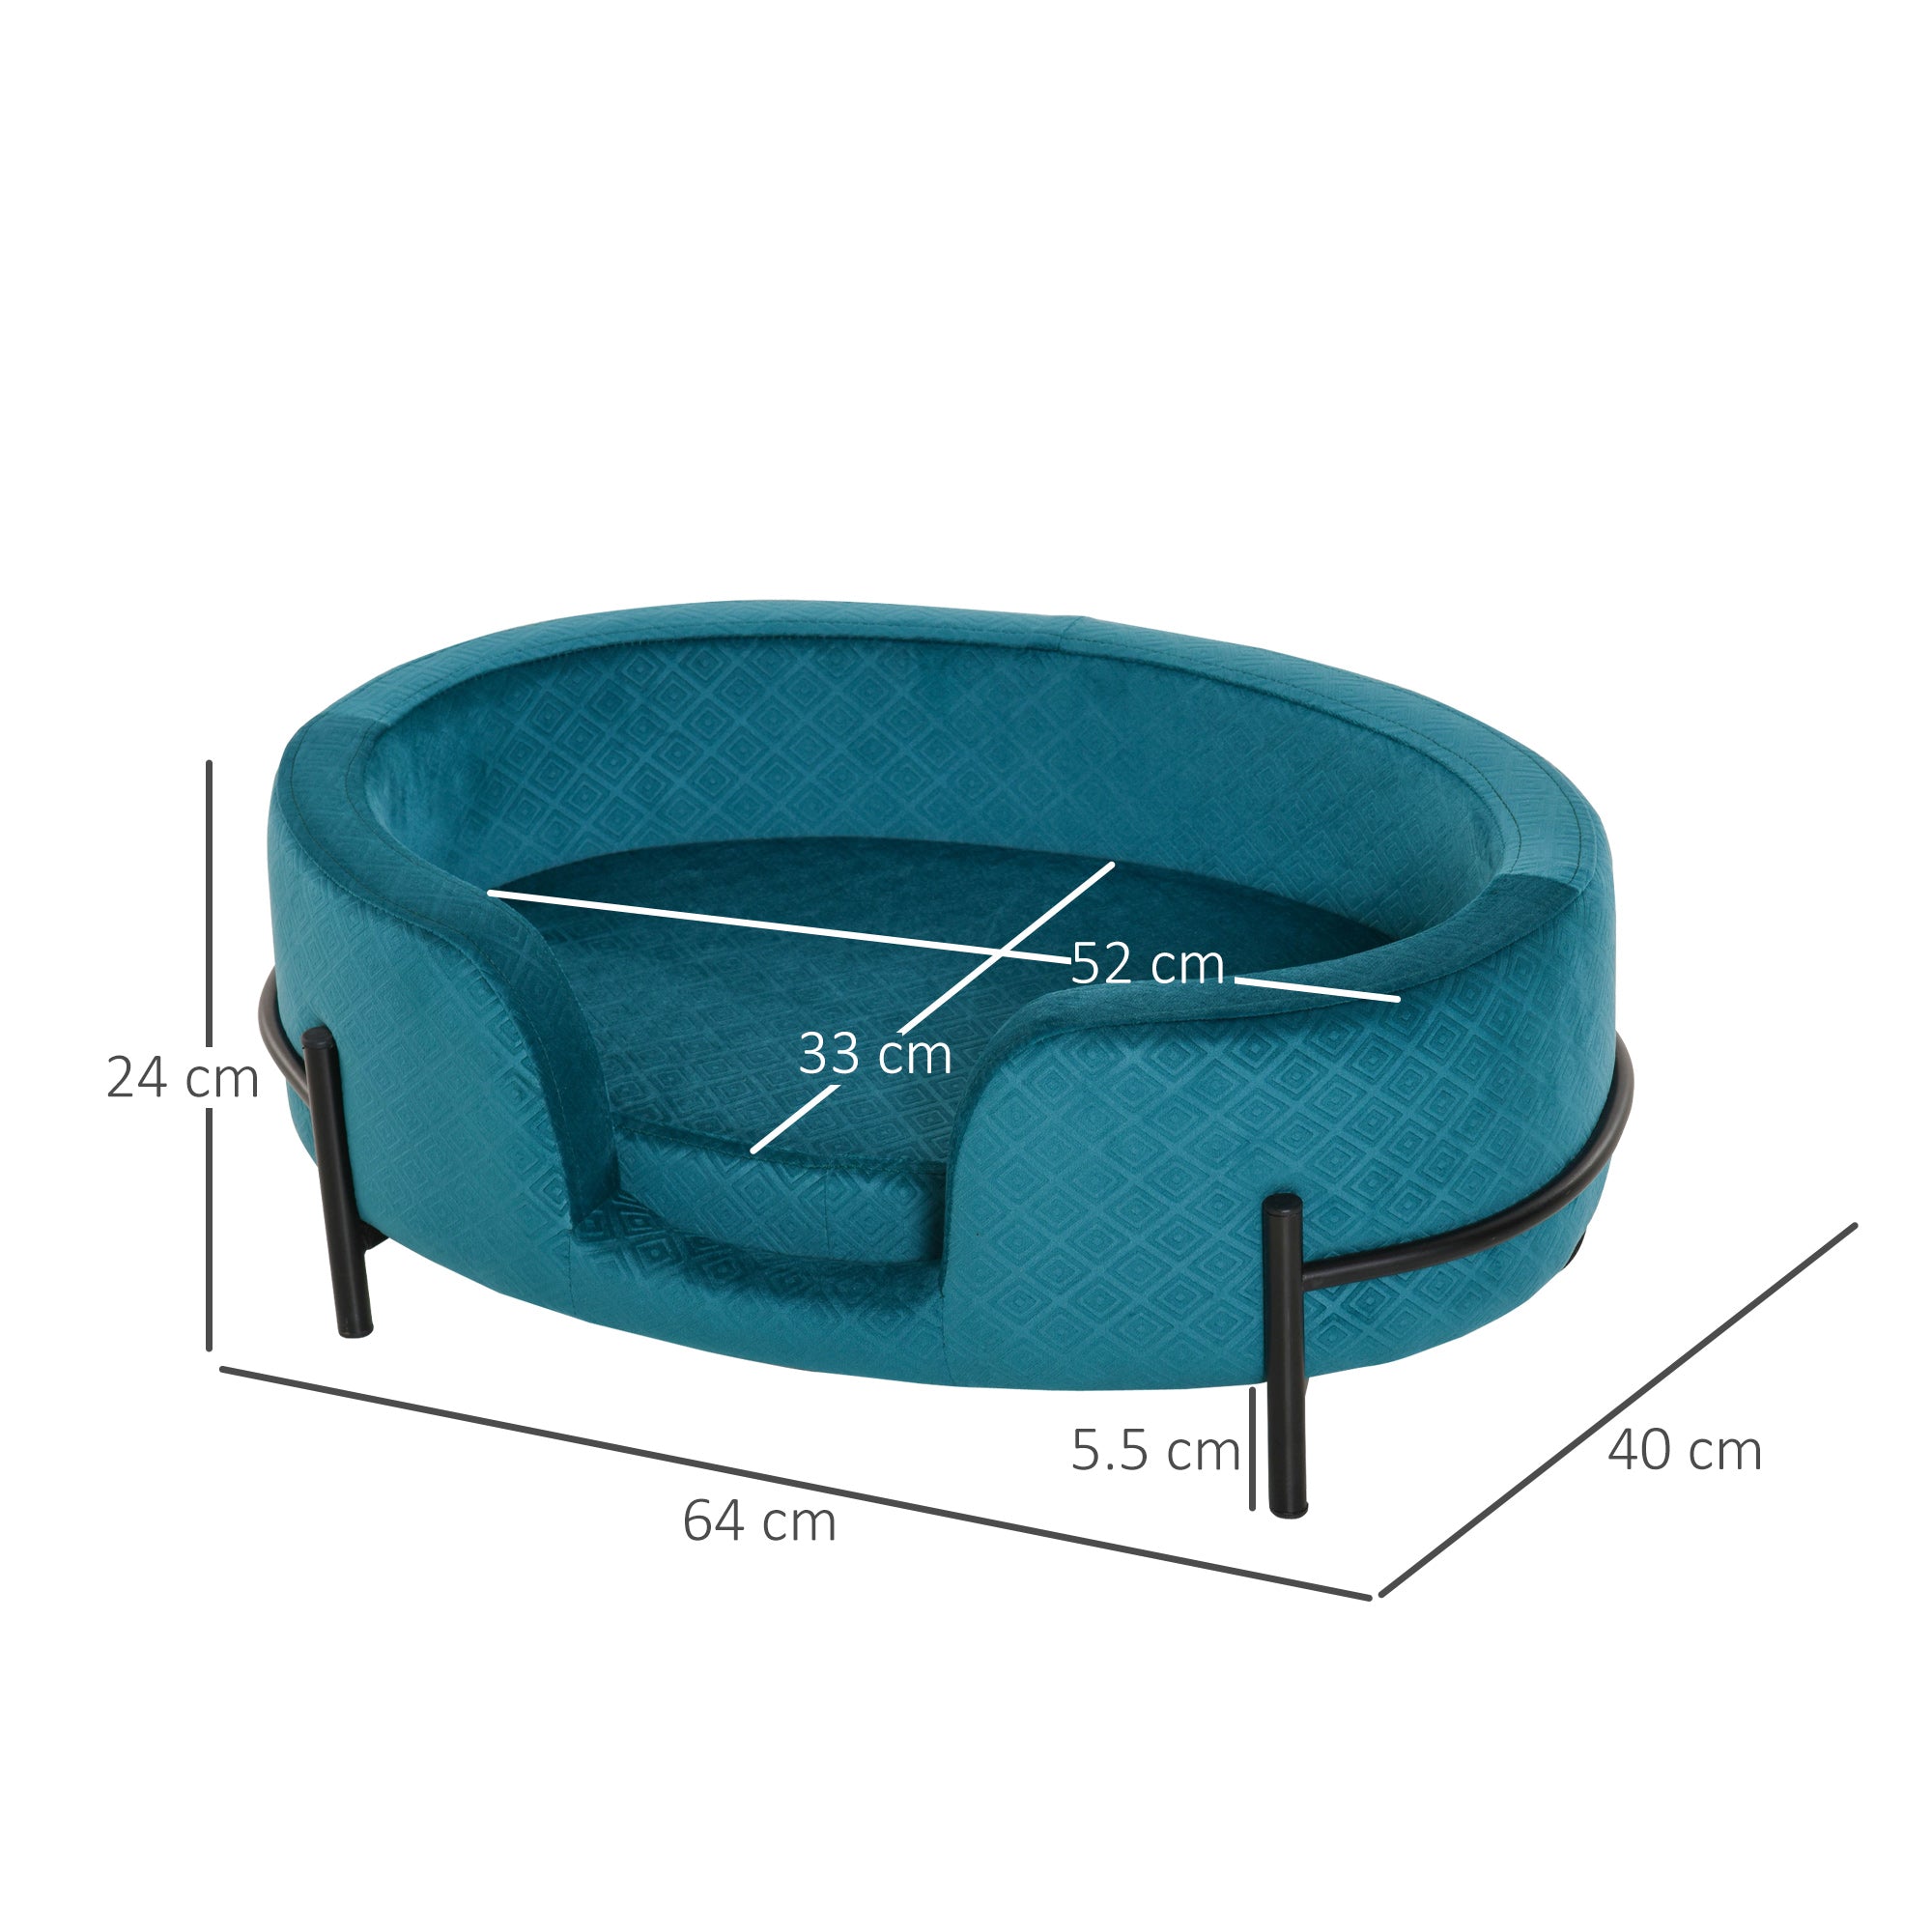 Pet Sofa Cat or Small Sized Dog Bed W/ Removable Seat Cushion Solid Metal Base, Teal